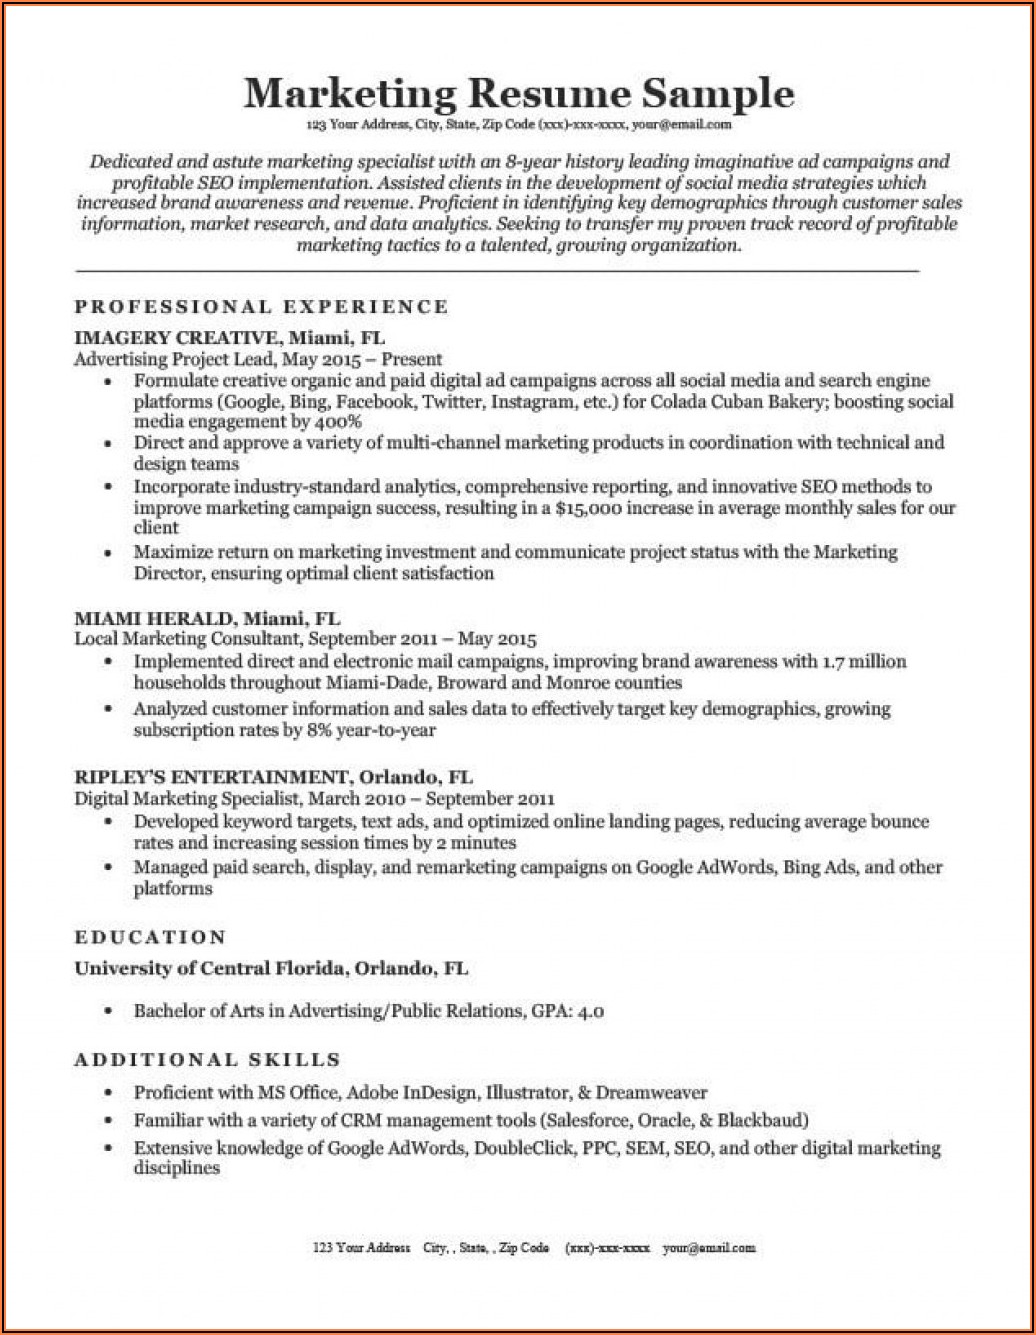 Resume Title Examples For Any Job Effective 77 Interview Getting Resume Samplesjob Job